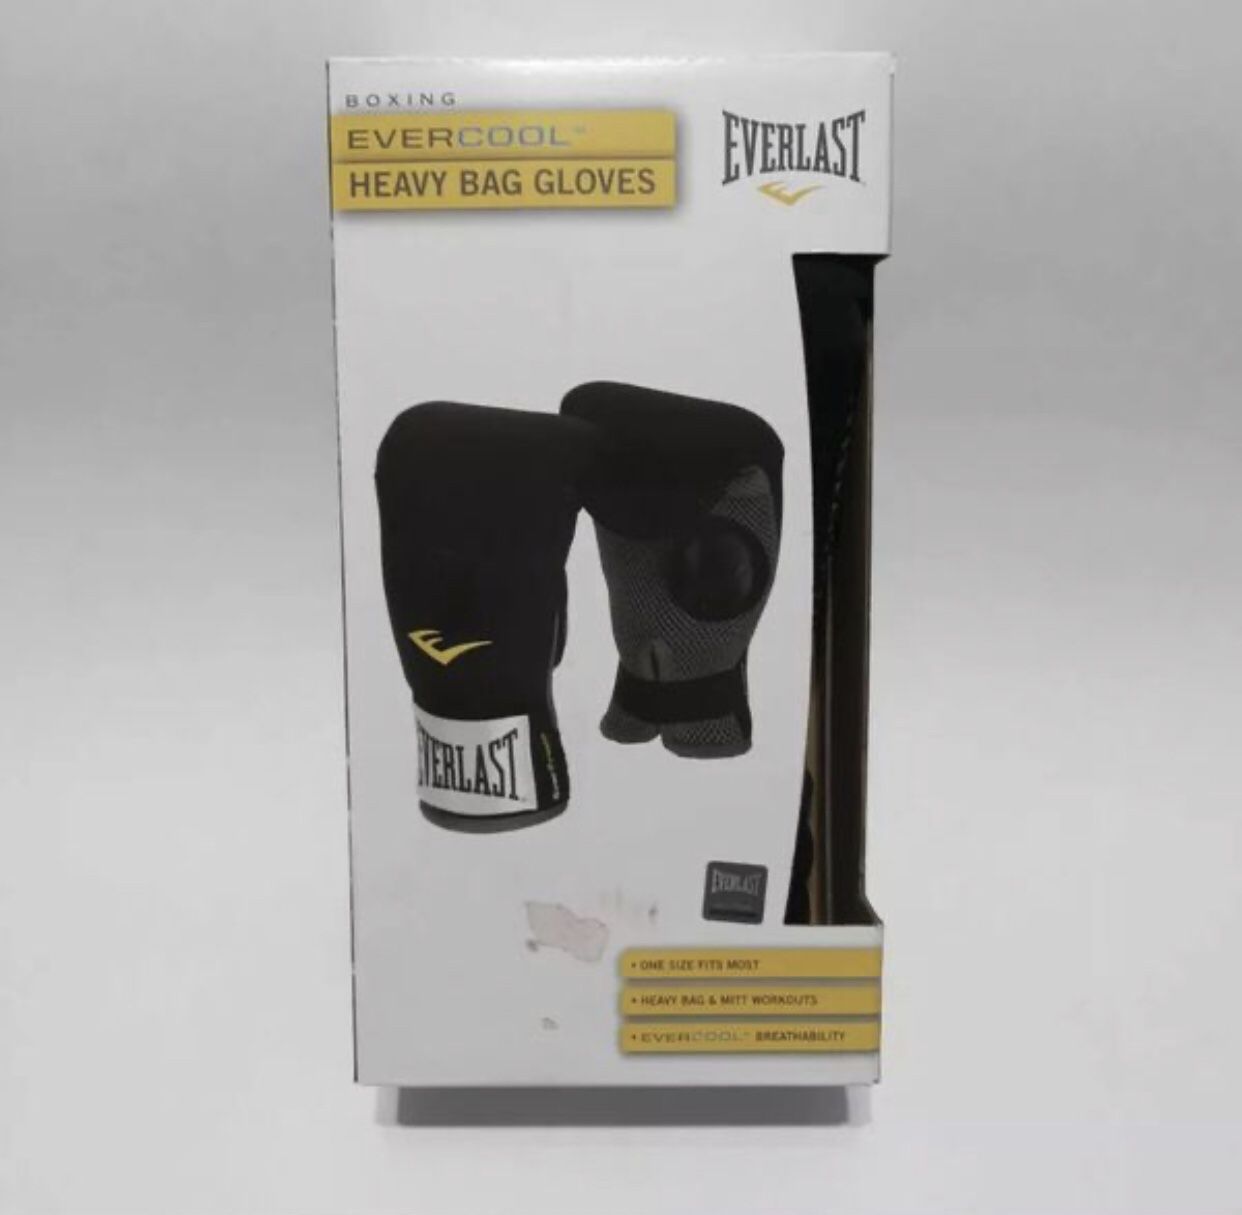 I HAVE 3 PAIRS LEFT EVERLAST BOXING EVERCOOL HEAVY BAG & MITT WORKOUT GLOVES Model: 4303T $10ea